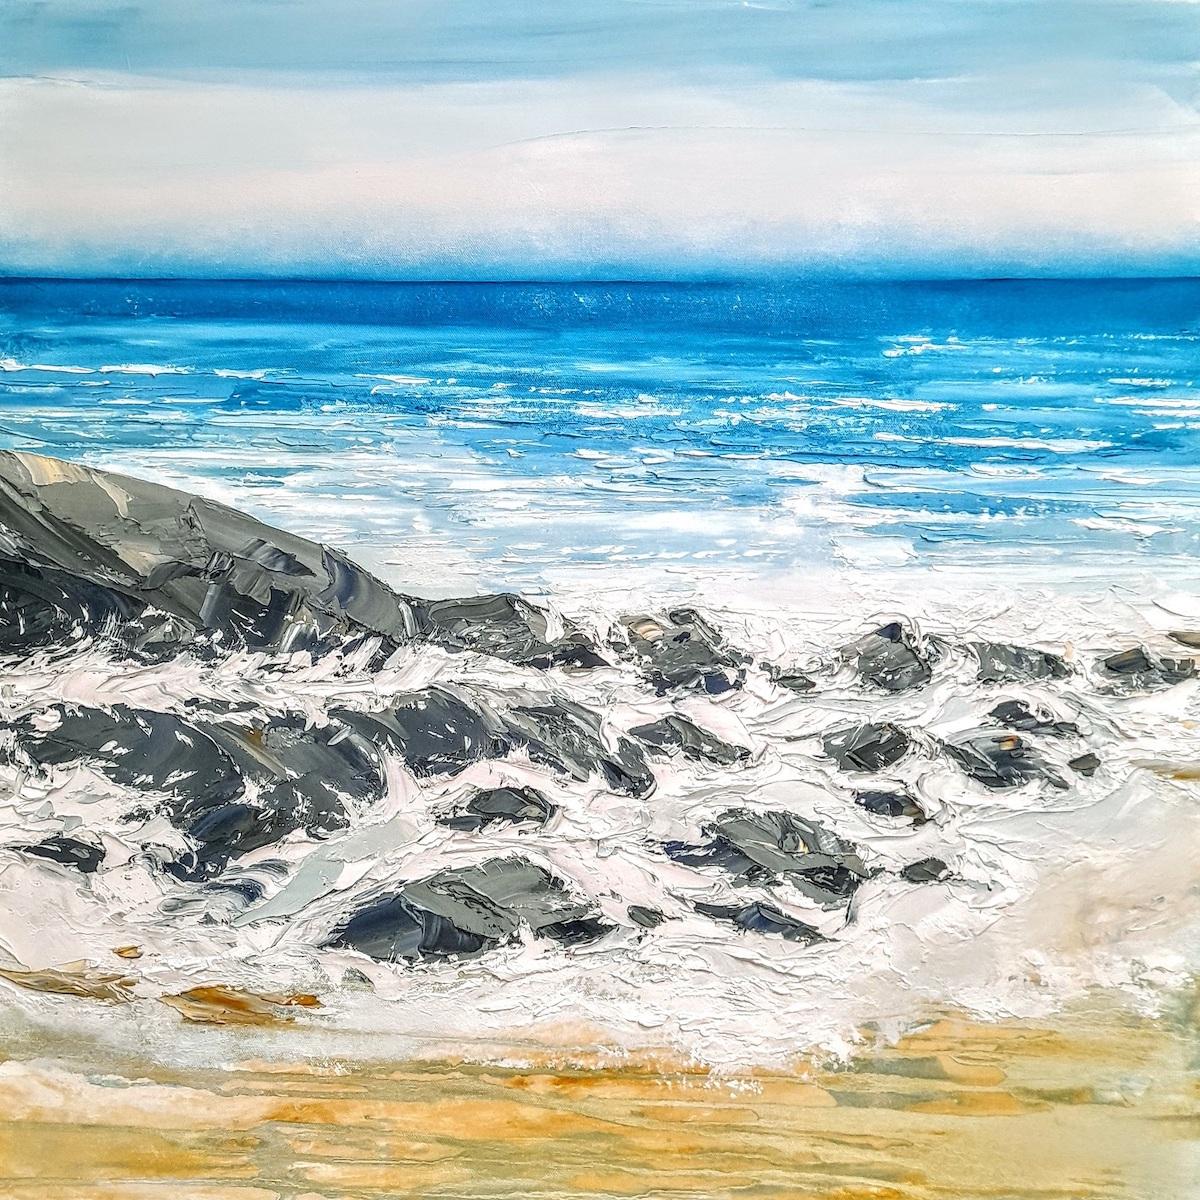 Summer on the Cornwall Coast by Georgie Dowling [2022]
original and hand signed by the artist 
Oil paint on canvas
Image size: H:75 cm x W:75 cm
Complete Size of Unframed Work: H:75 cm x W:75 cm x D:4cm
Sold Unframed
Please note that insitu images